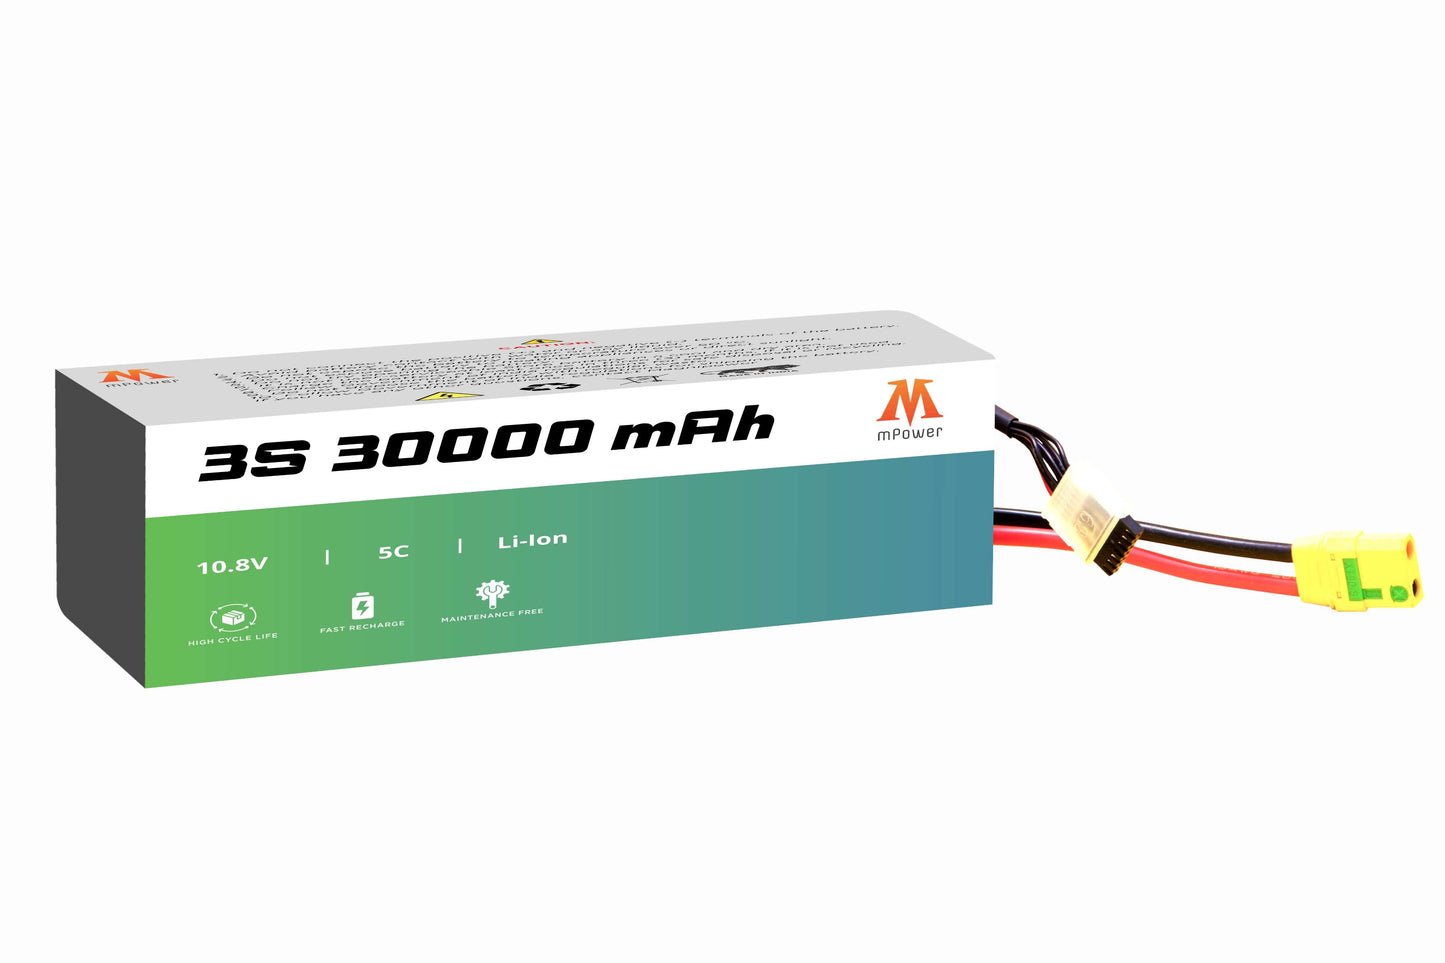 mPower 3S 30000mAh Lithium-Ion Battery for Surveillance Drones